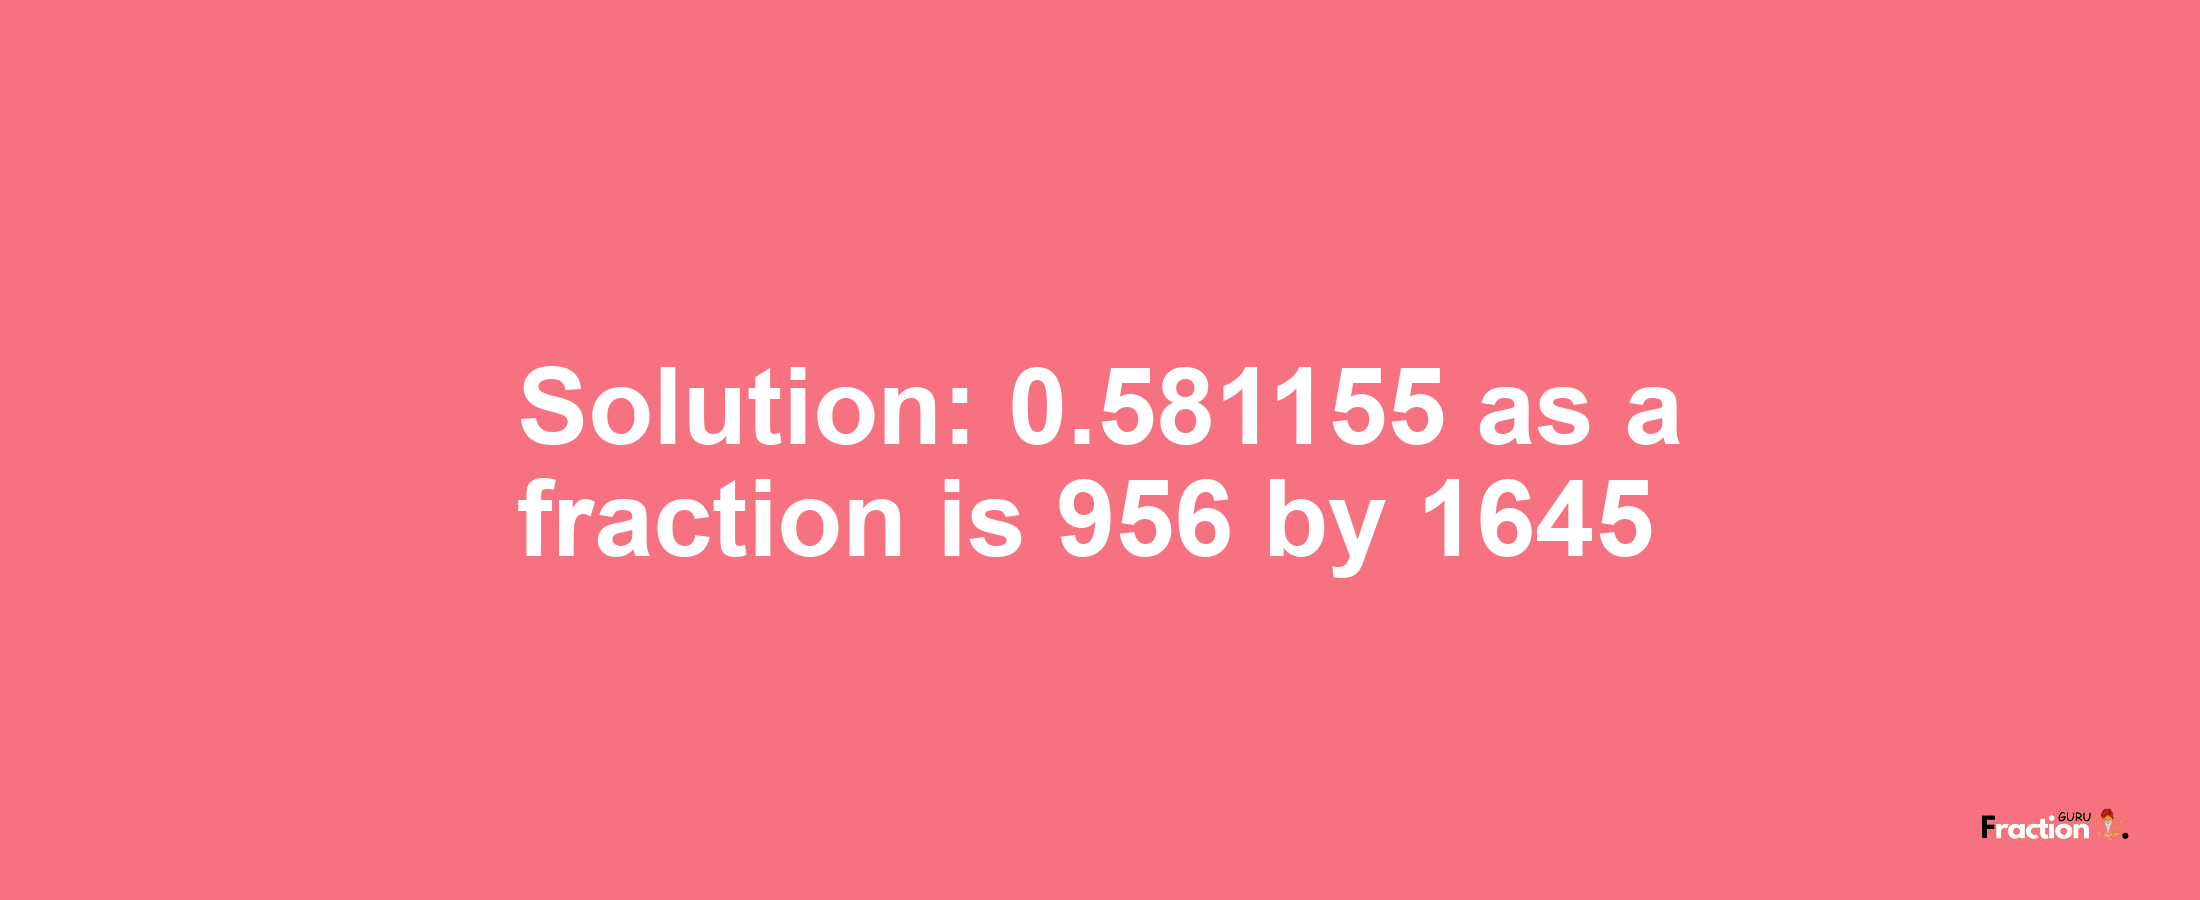 Solution:0.581155 as a fraction is 956/1645